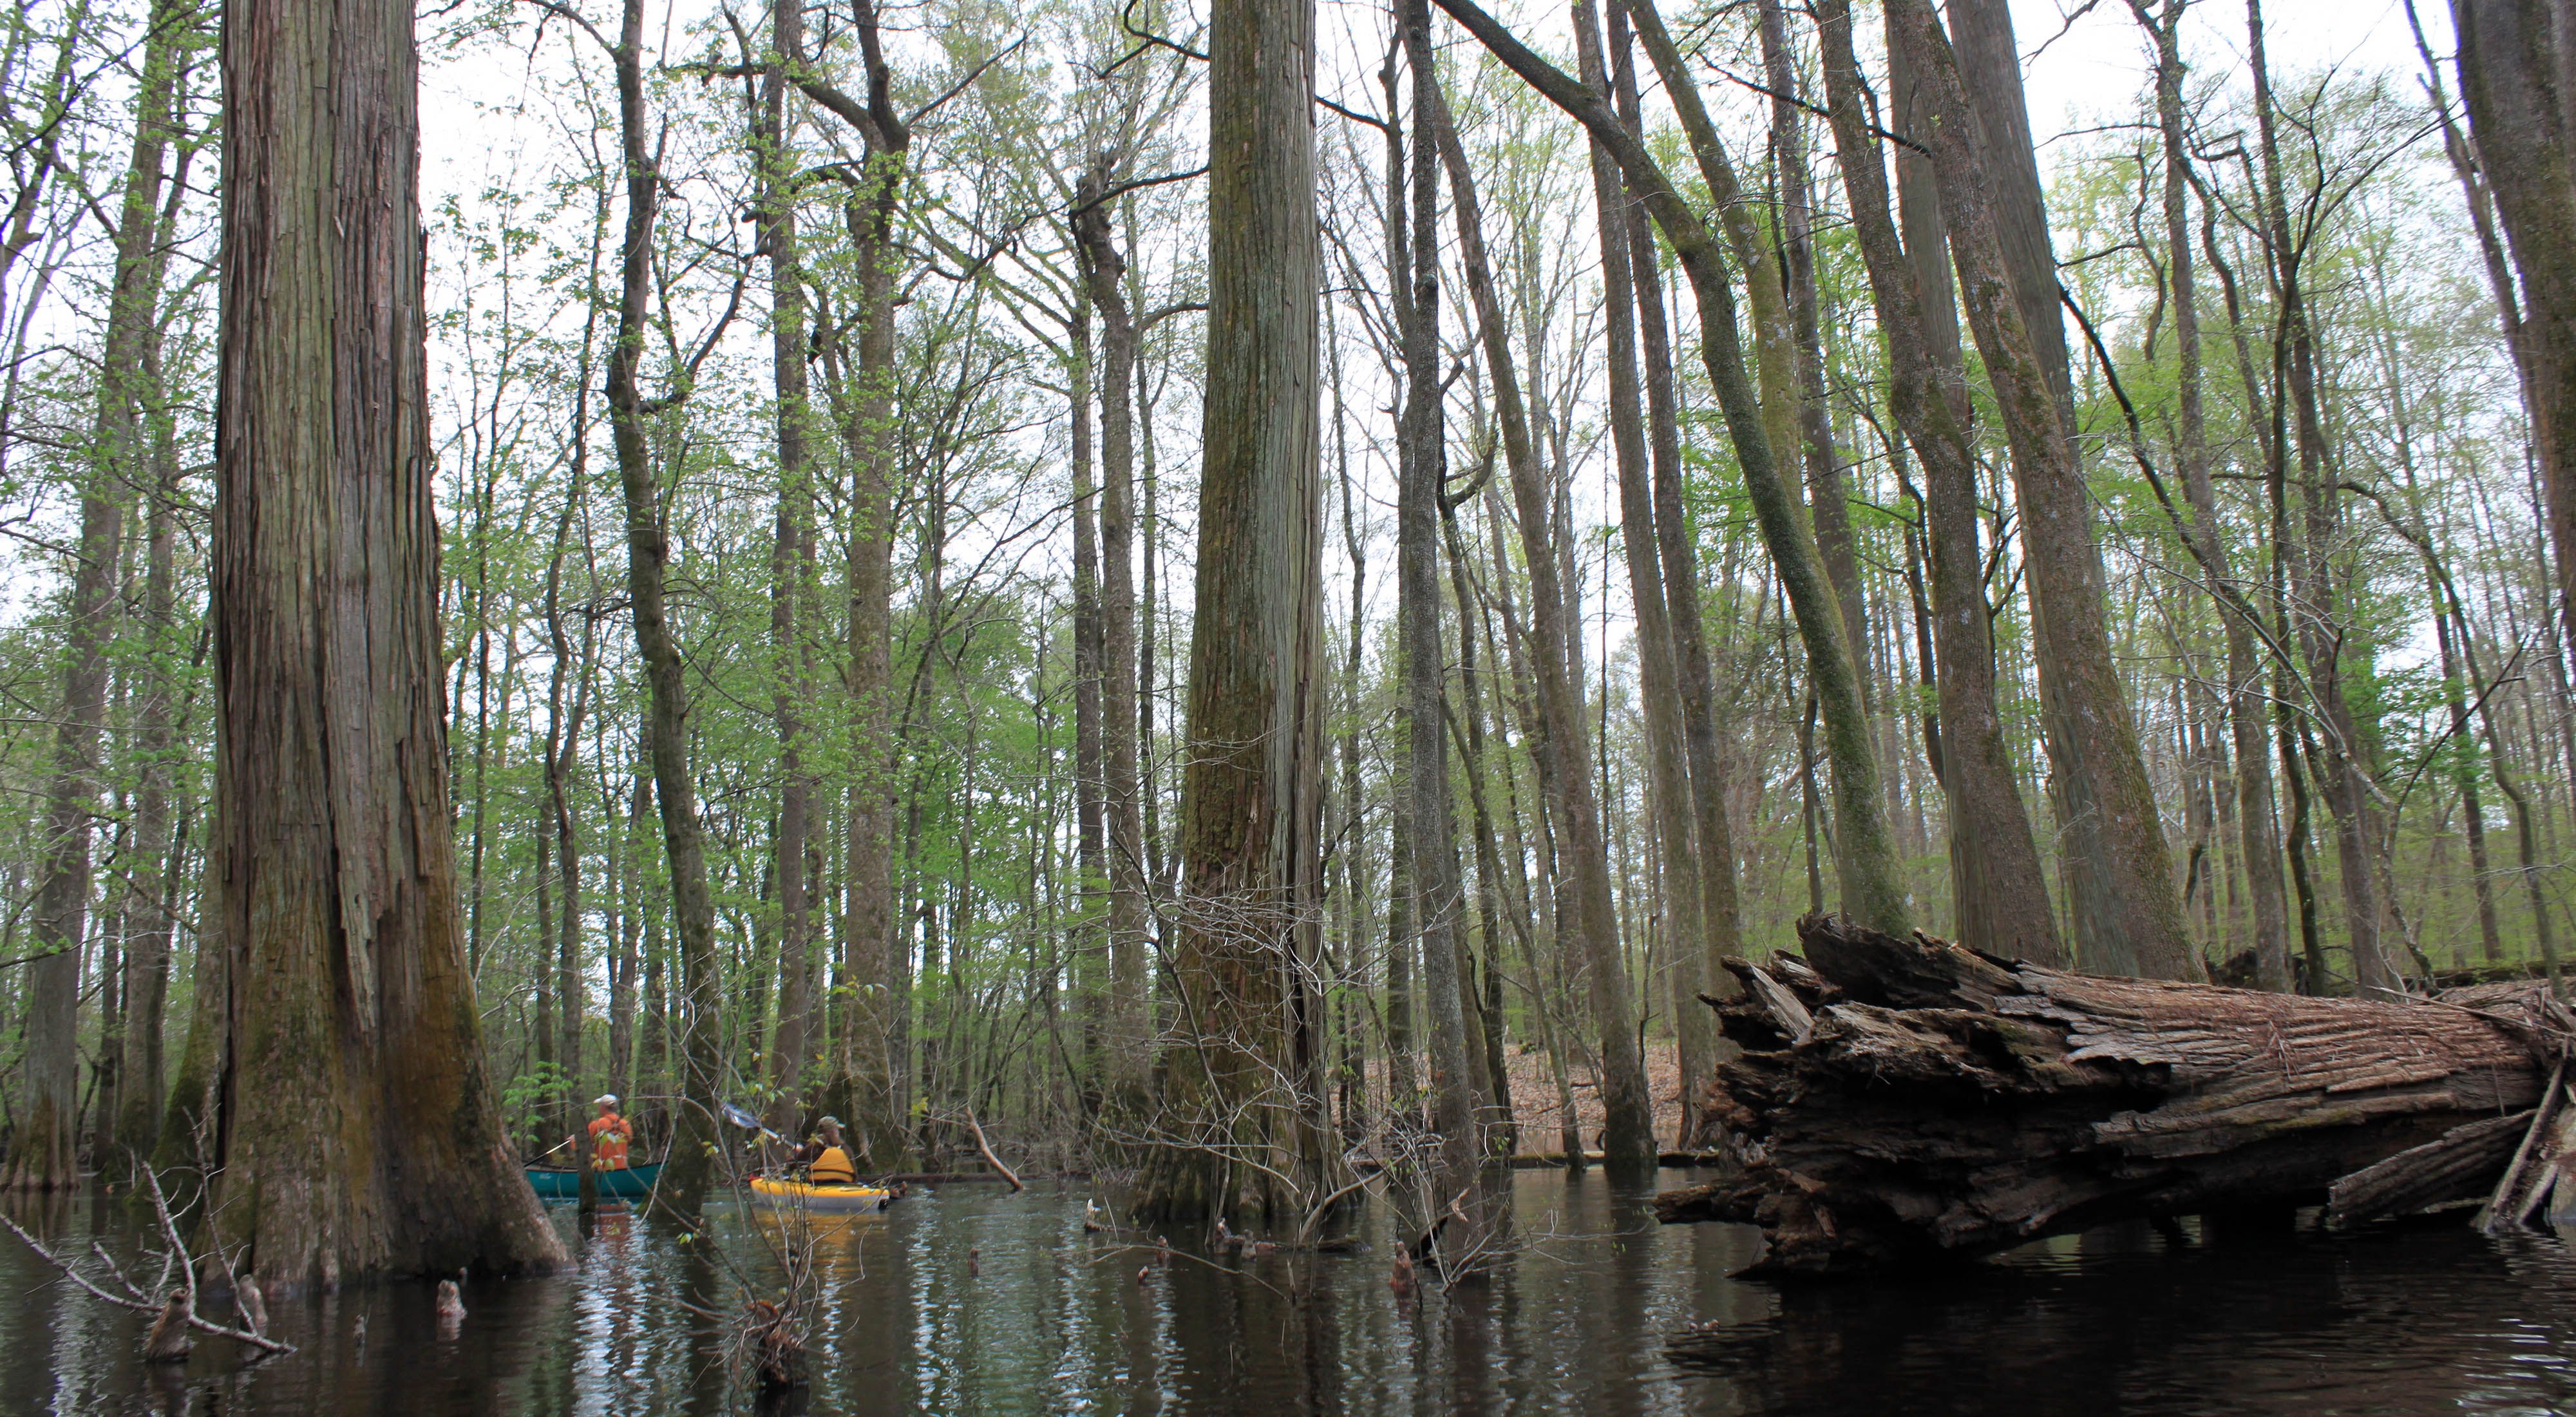 Two kayakers float through a cypress swamp. The height of the trees dwarfs the two people. A fallen tree is in the foreground its broken trunk visible above the dark water.